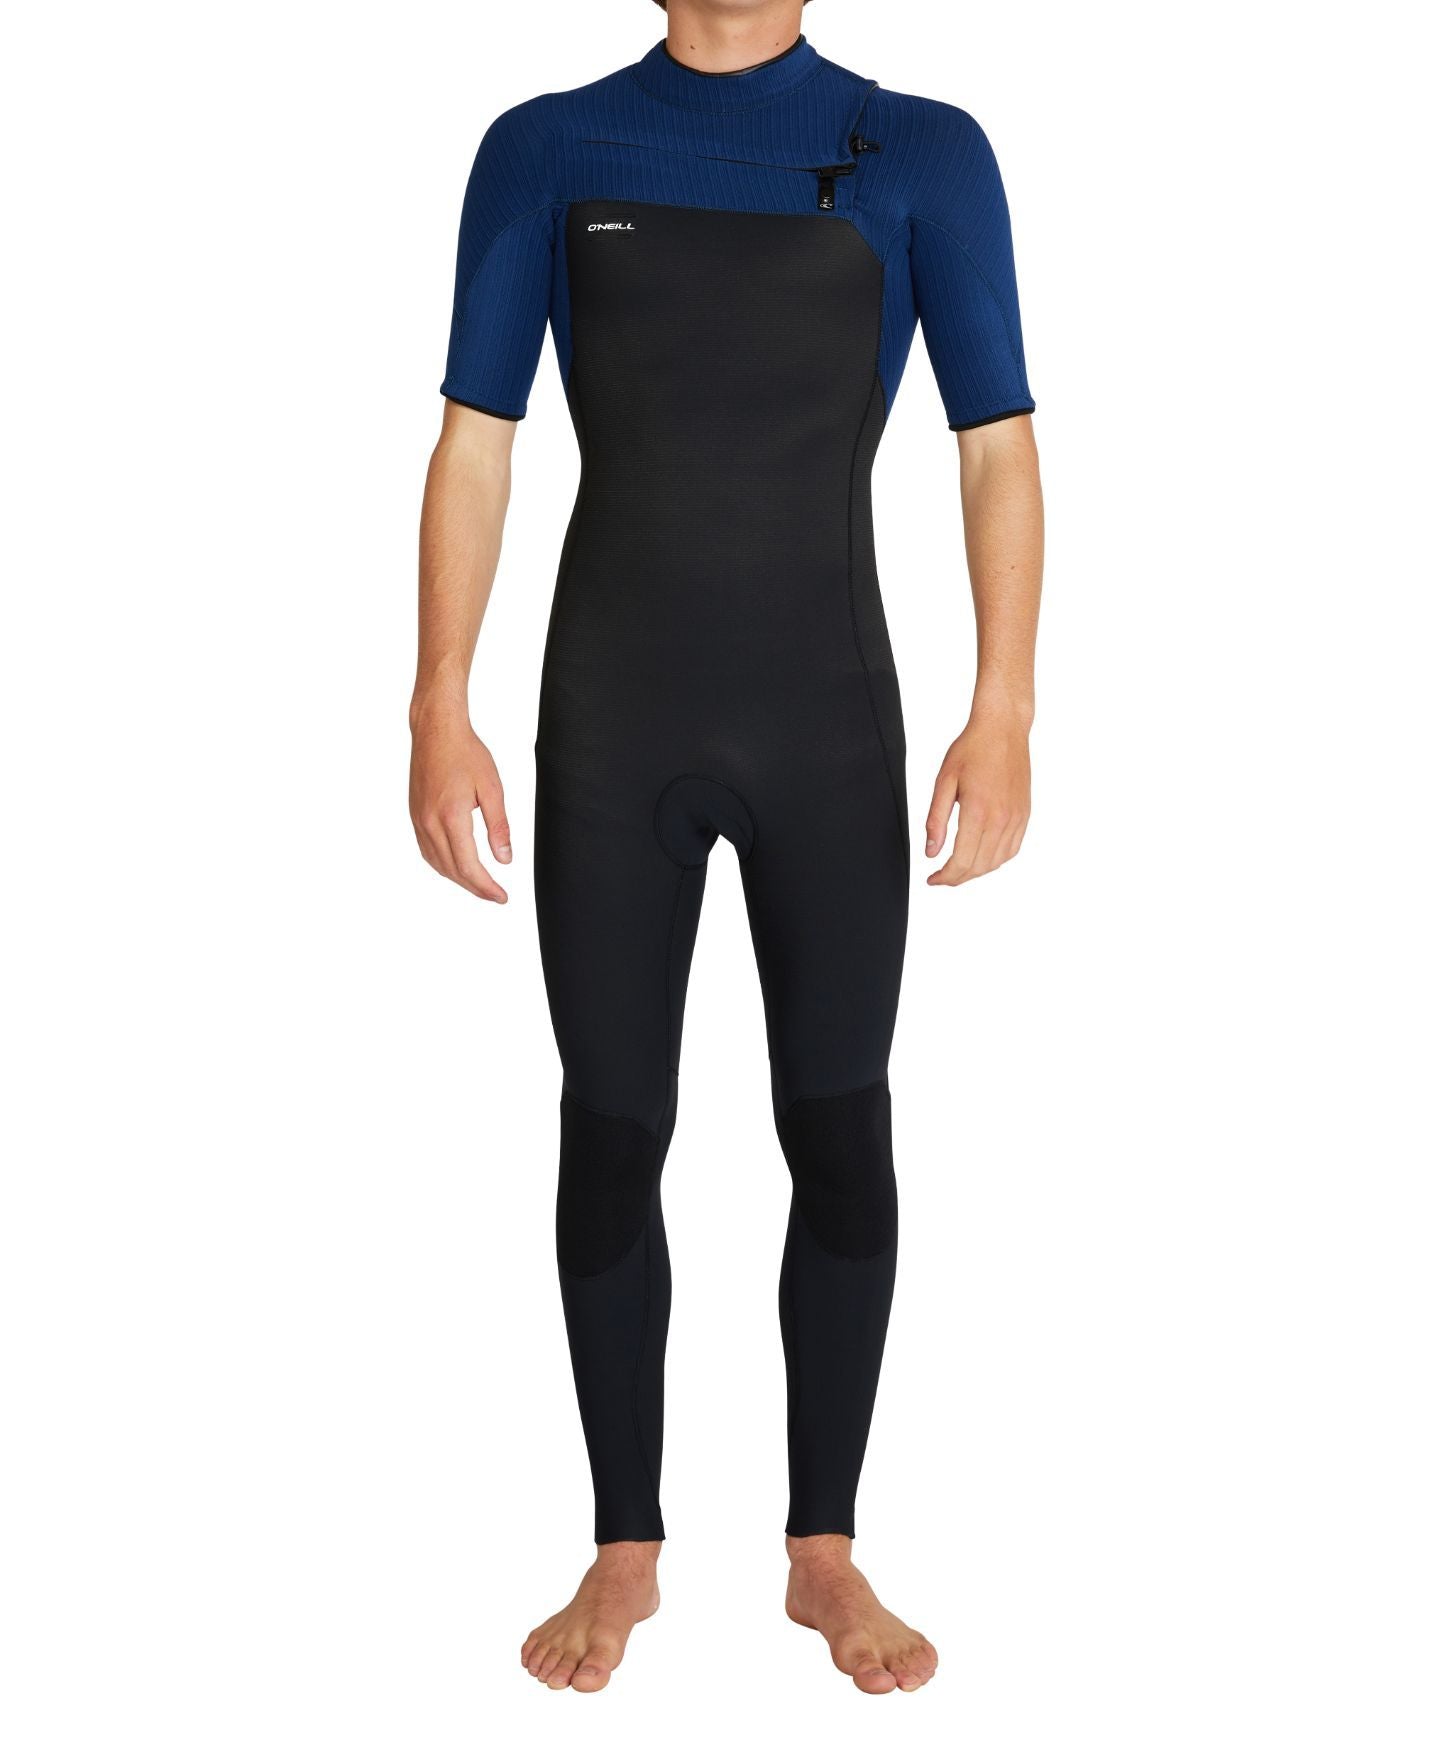 O'Neill Hyperfreak 2mm CZ SS Full Wetsuit GBS in black and marine colourway